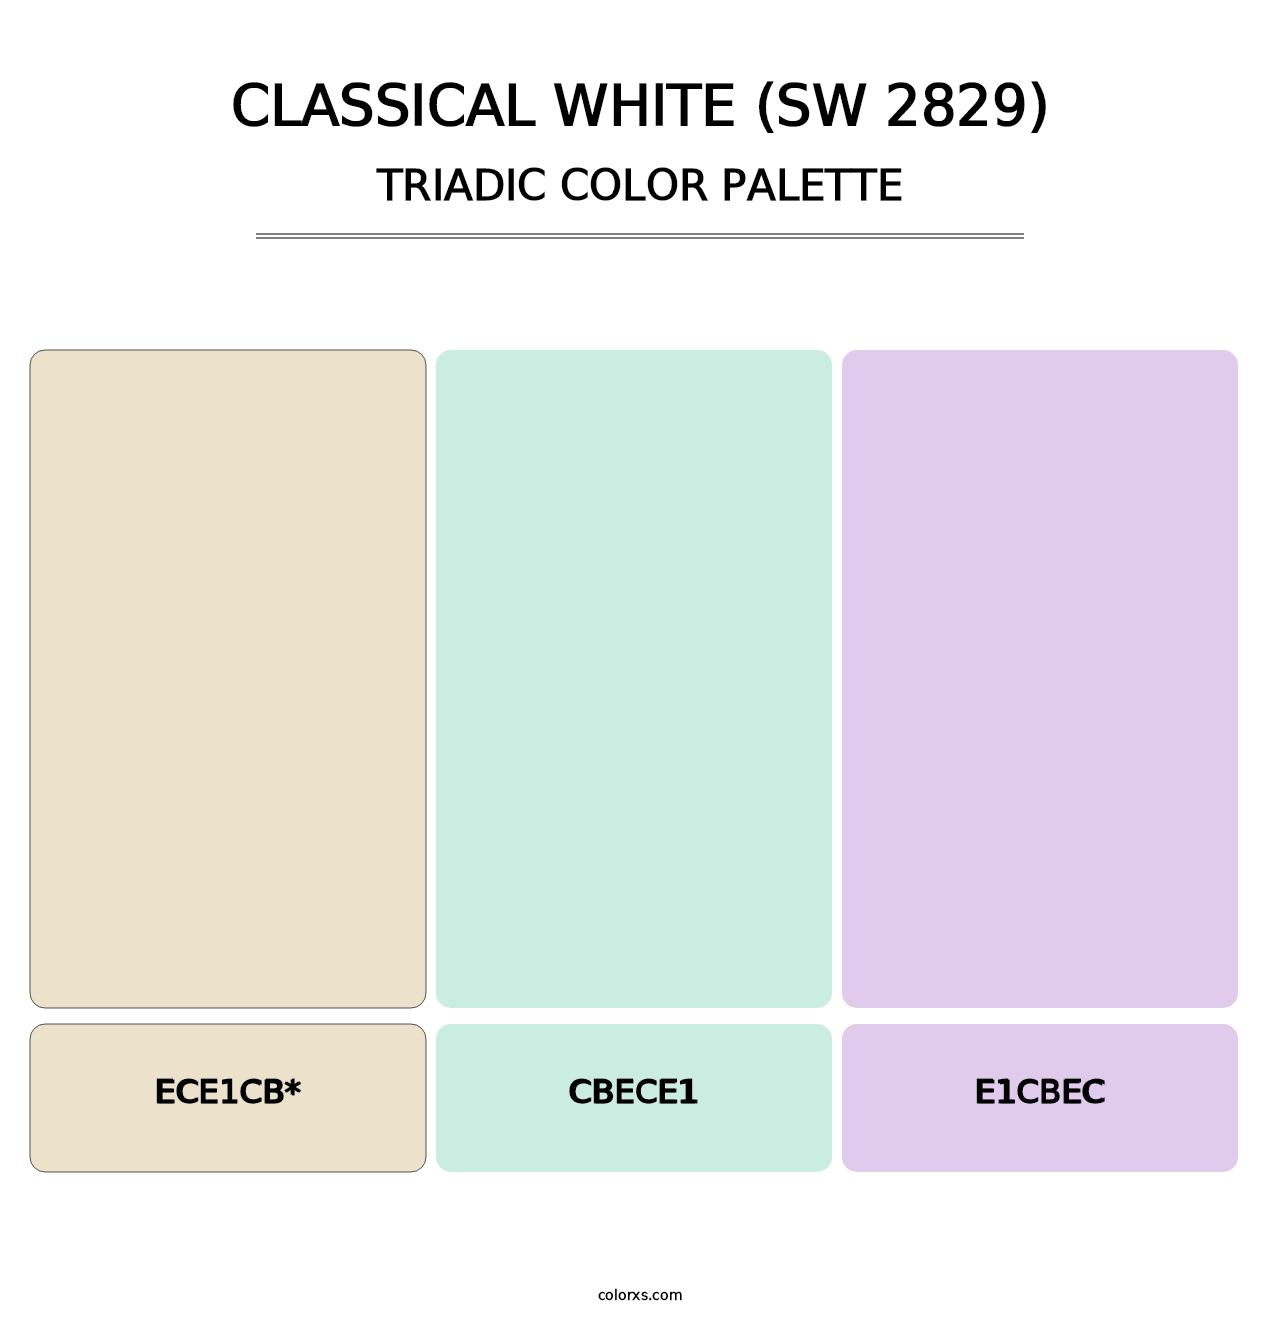 Classical White (SW 2829) - Triadic Color Palette